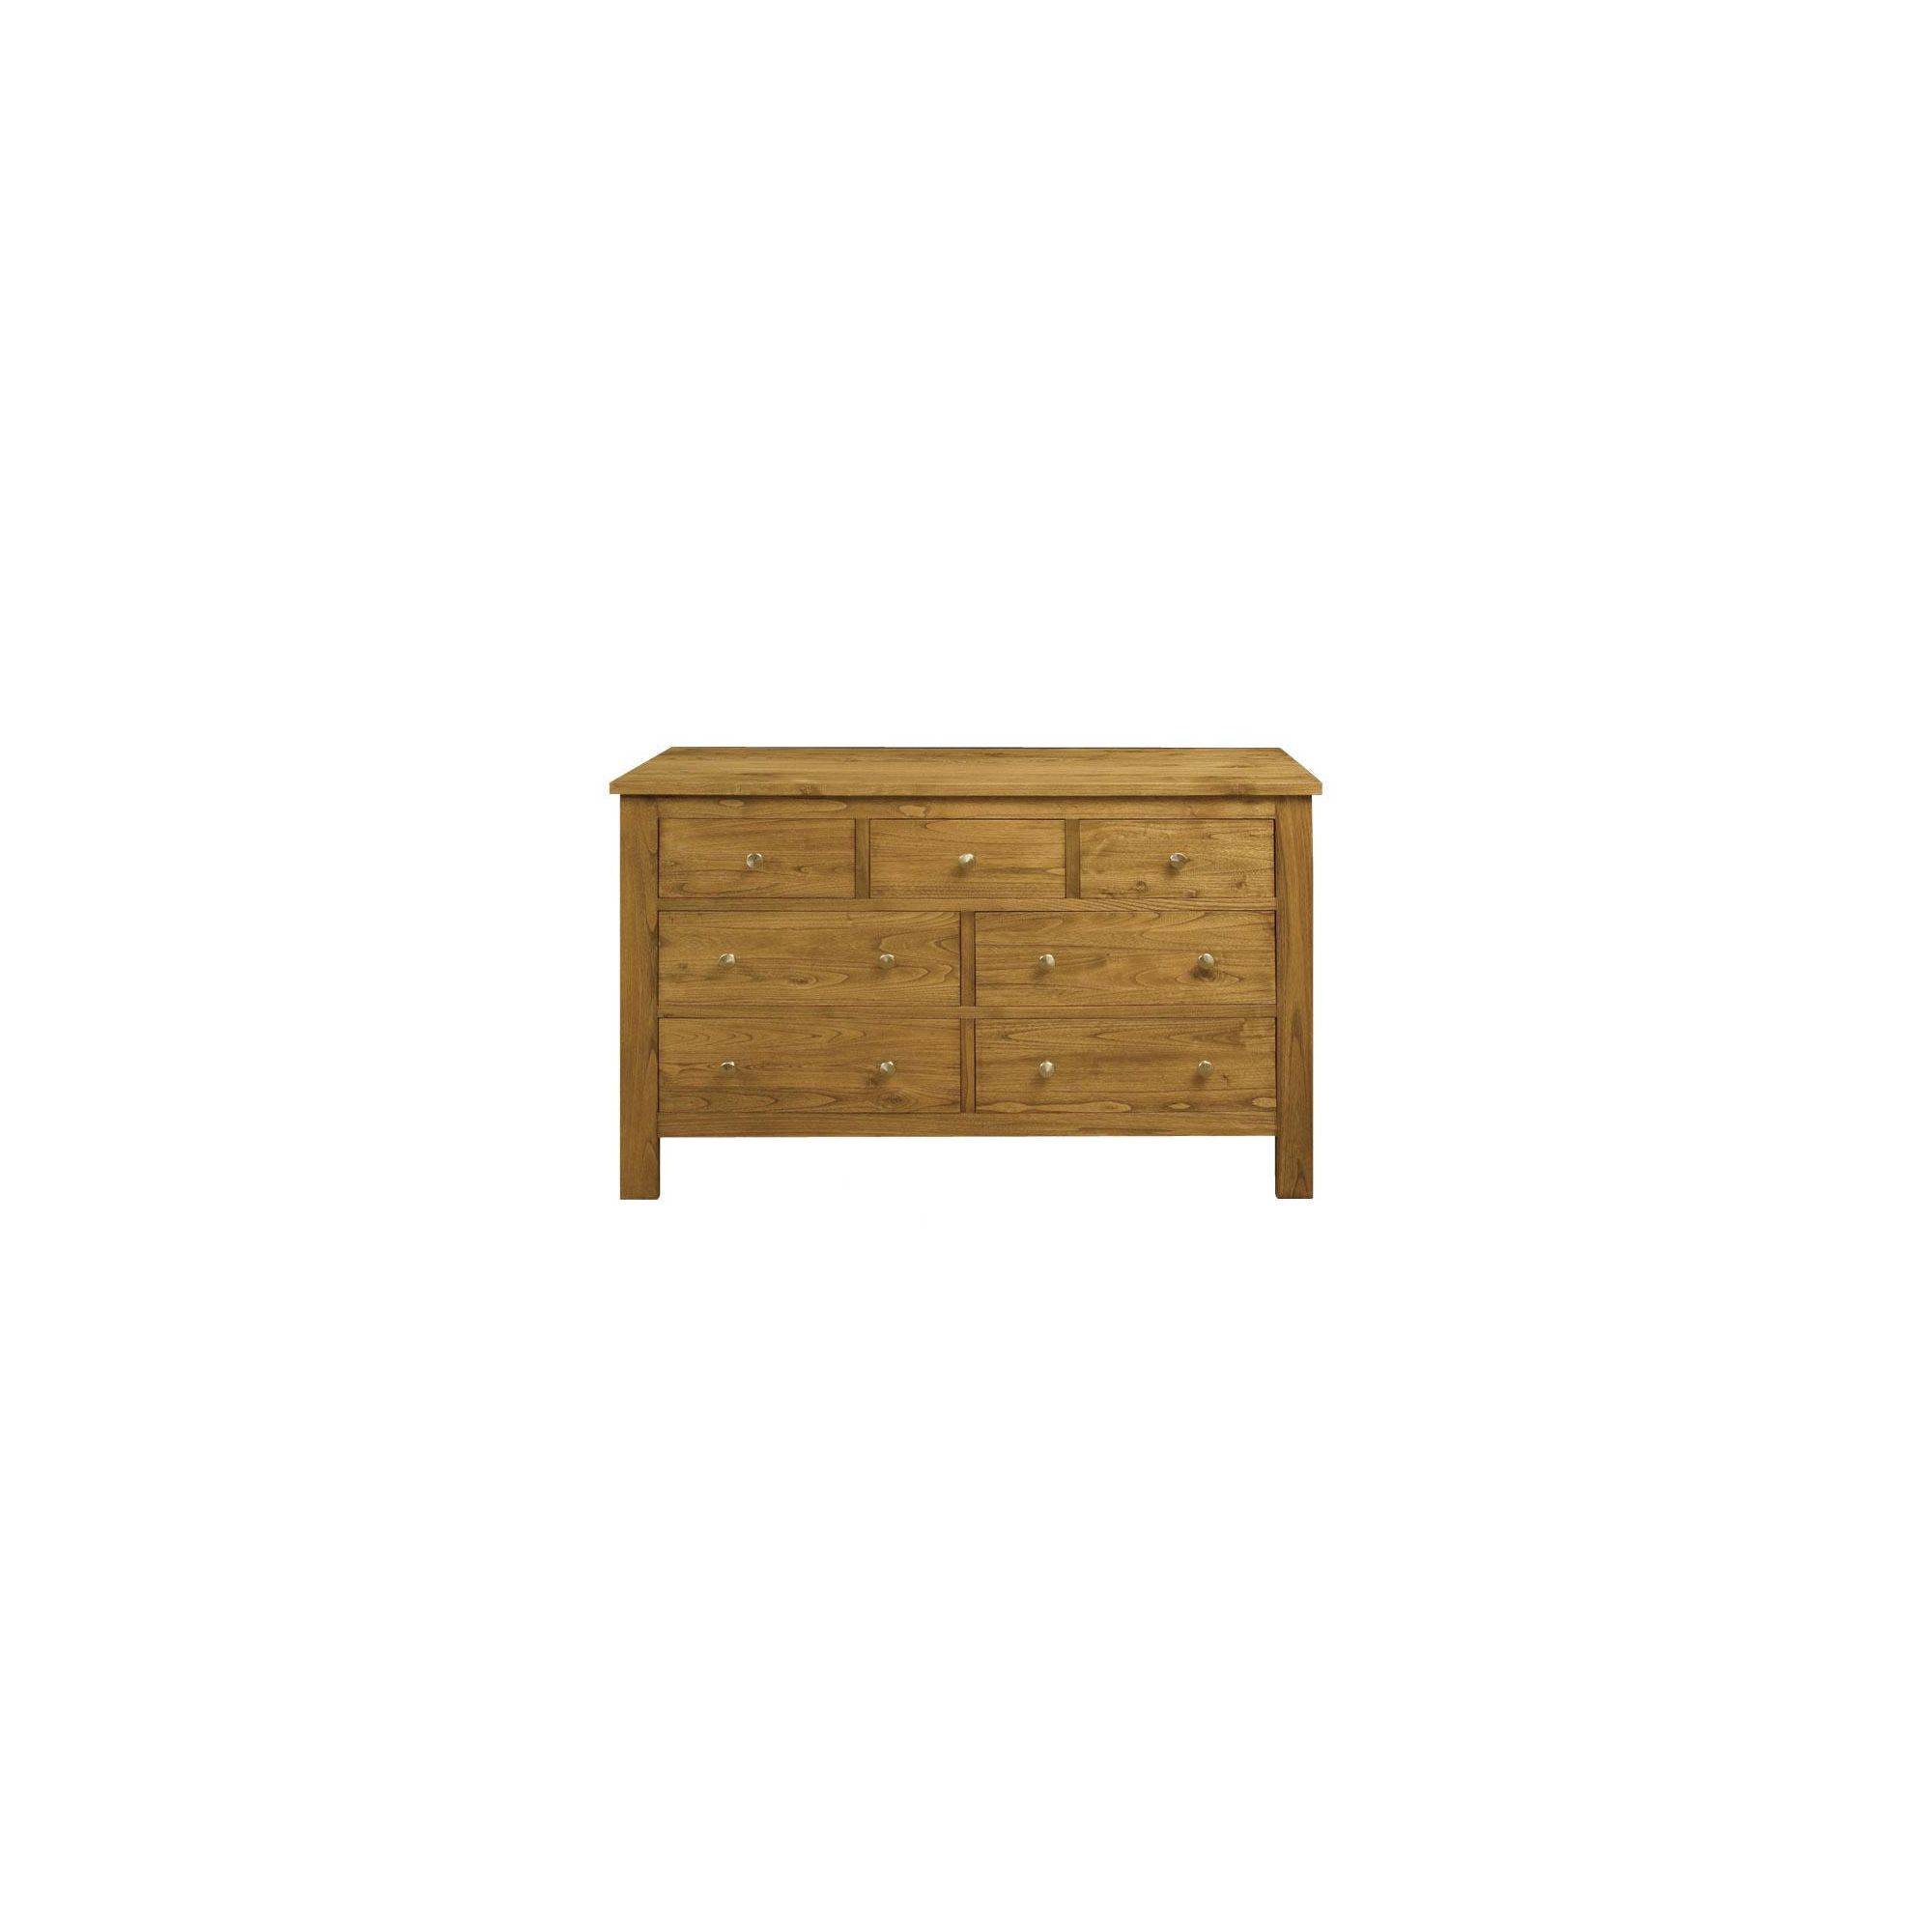 Alterton Furniture Madison 3 Over 2 Over 2 Drawer Chest at Tesco Direct